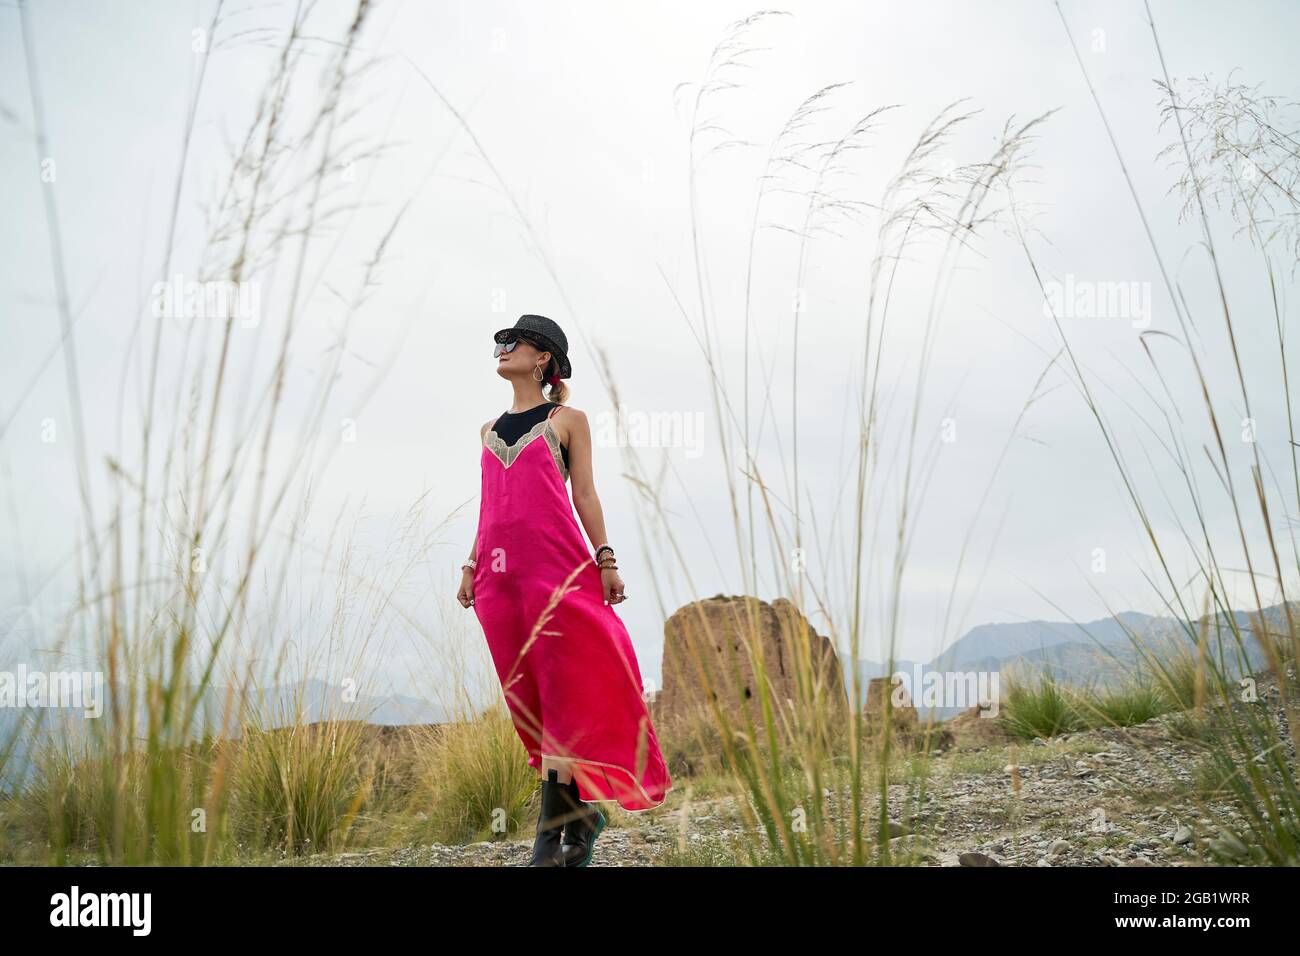 asian woman in red dress walking in a desolate historical site Stock Photo